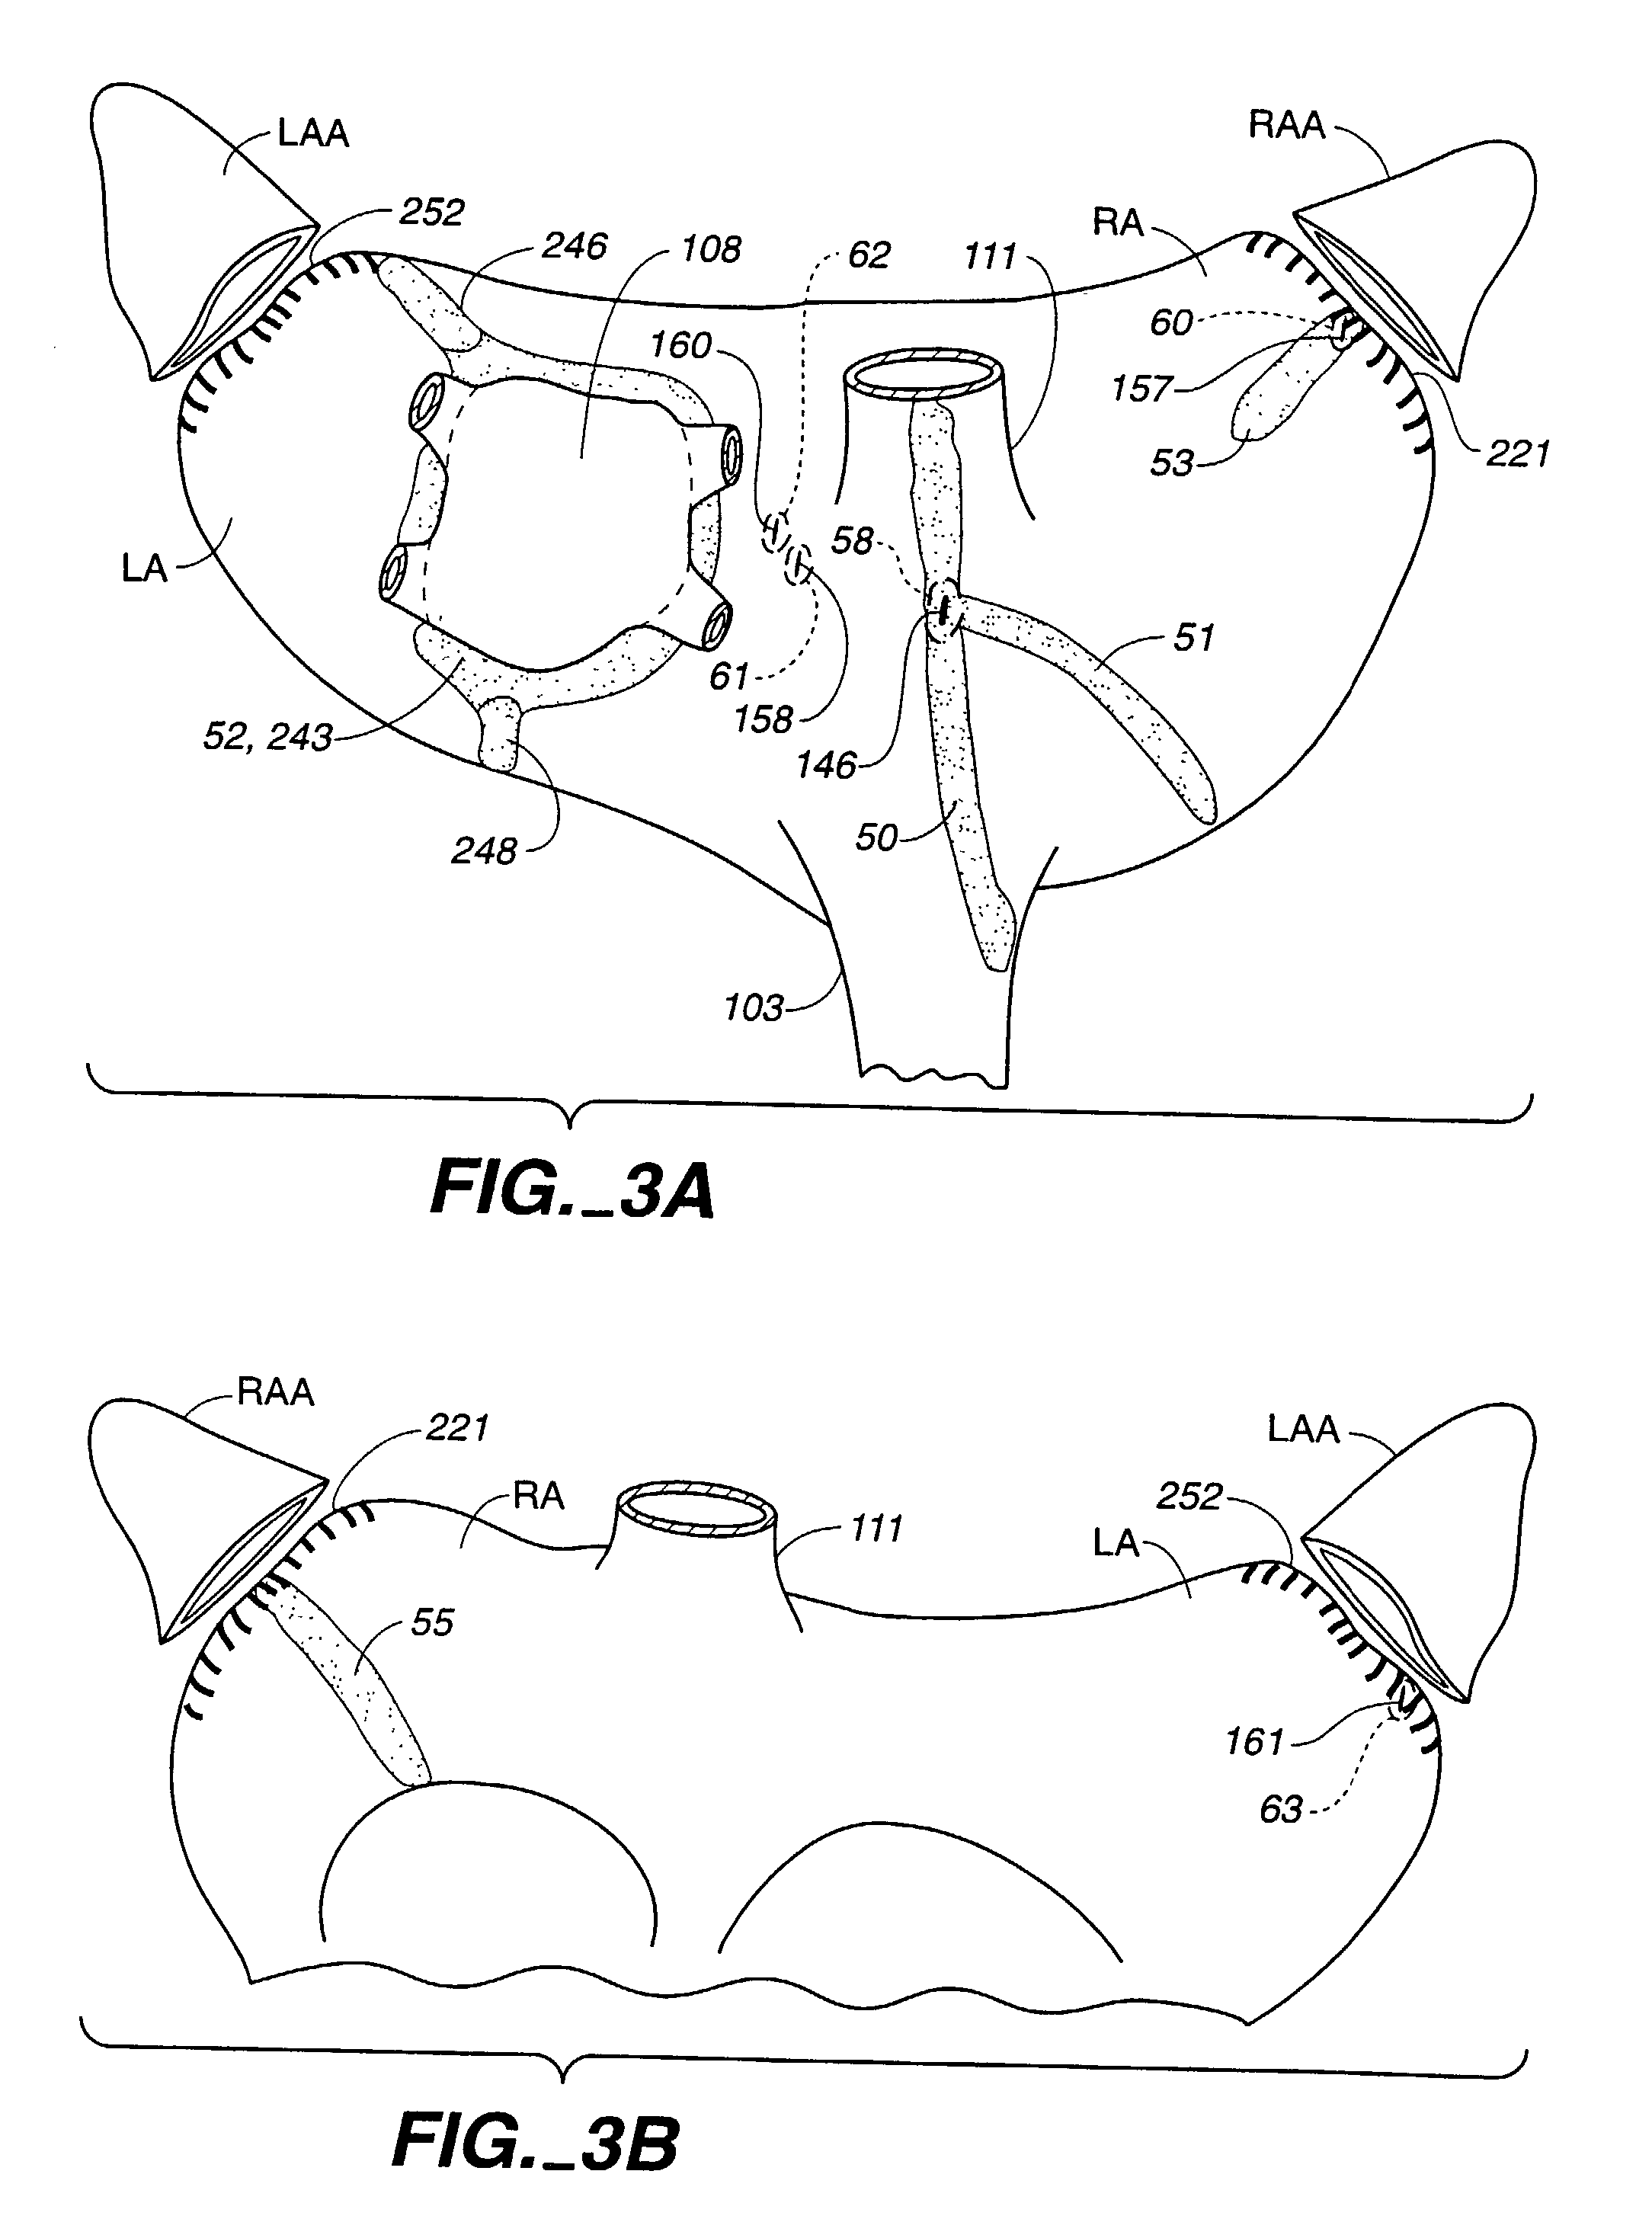 Surgical system and procedure for treatment of medically refractory atrial fibrillation